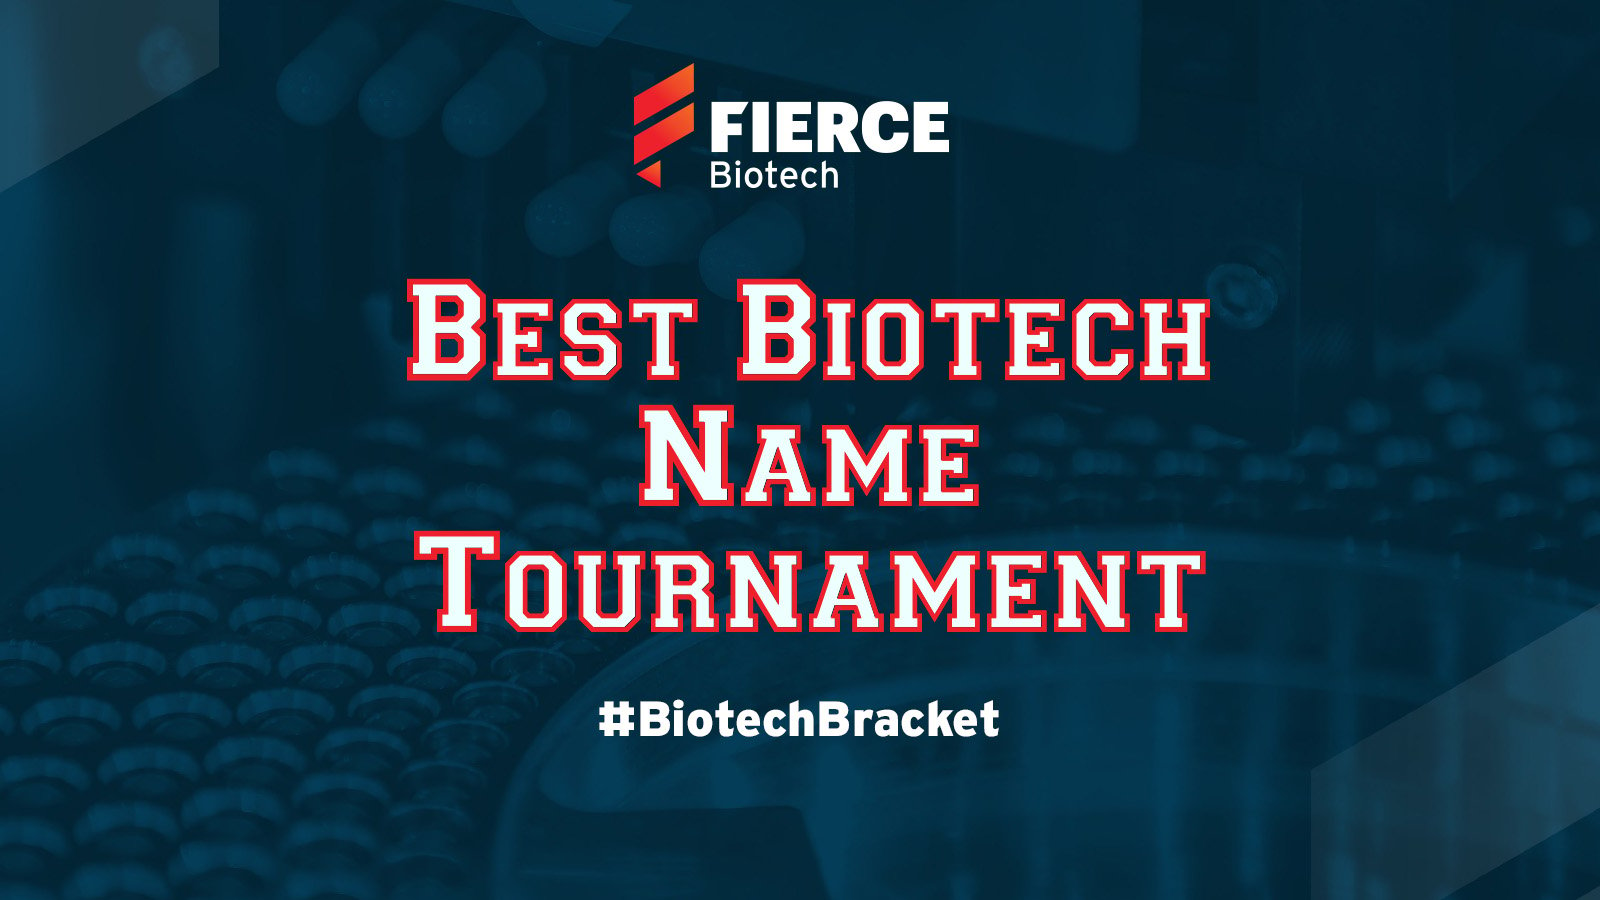 #FierceMadness: The Best Biotech Name Tournament—The Round of 32 is OPEN